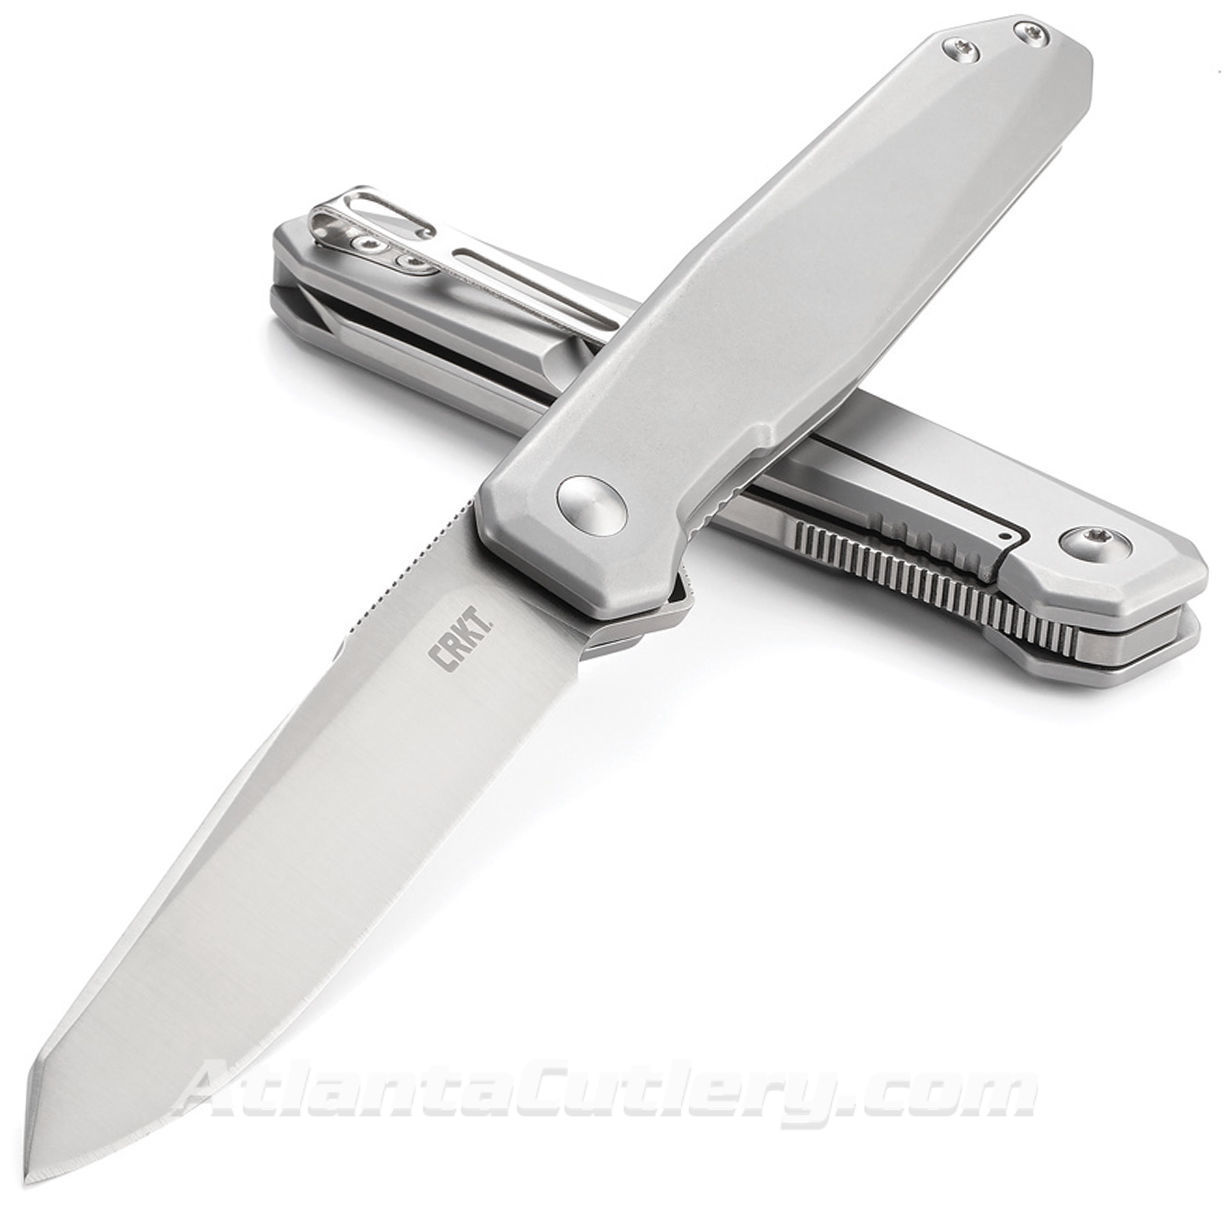 CRKT Facet Framelock assisted opening knife with grooveless grip design, straight sheepsfoot D2 blade steel, sharp point